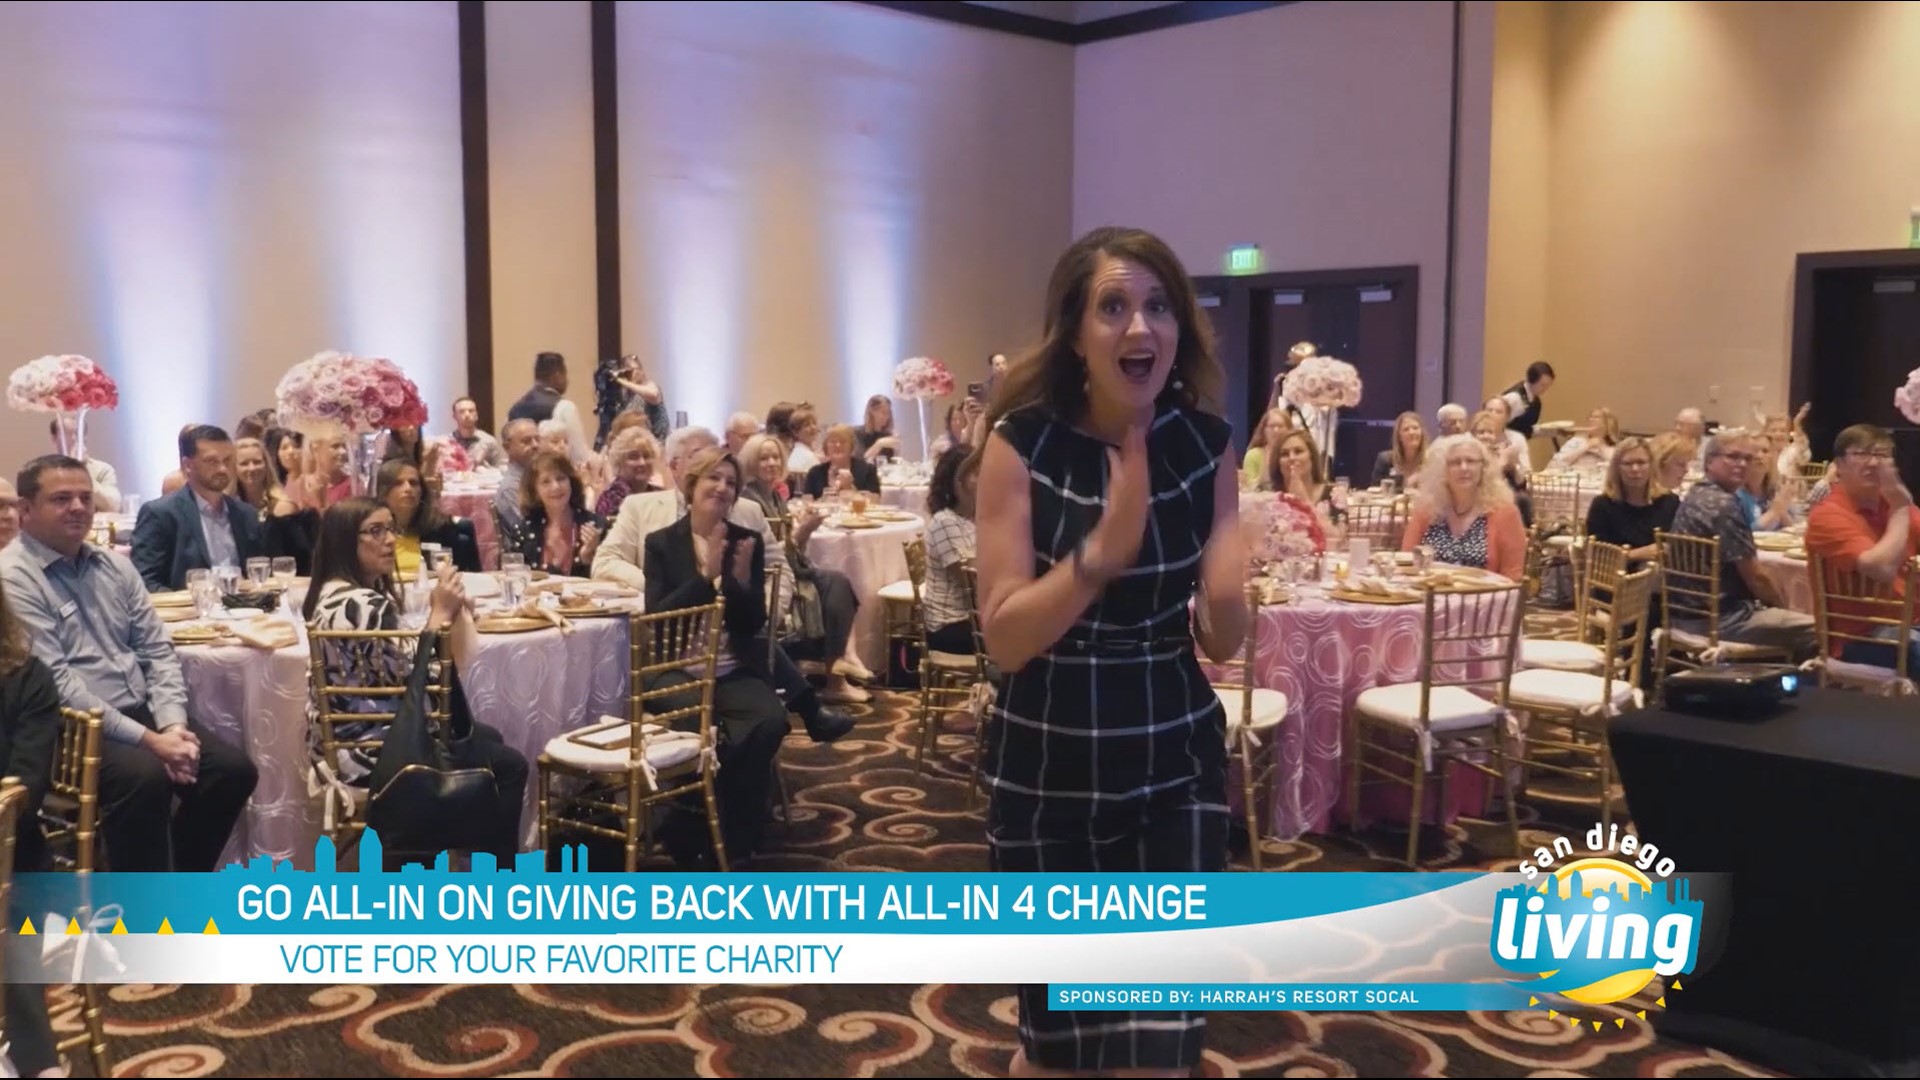 Go All-In on Giving Back with Harrah’s All-In 4 Change.  Sponsored by Harrah’s Resort SoCal